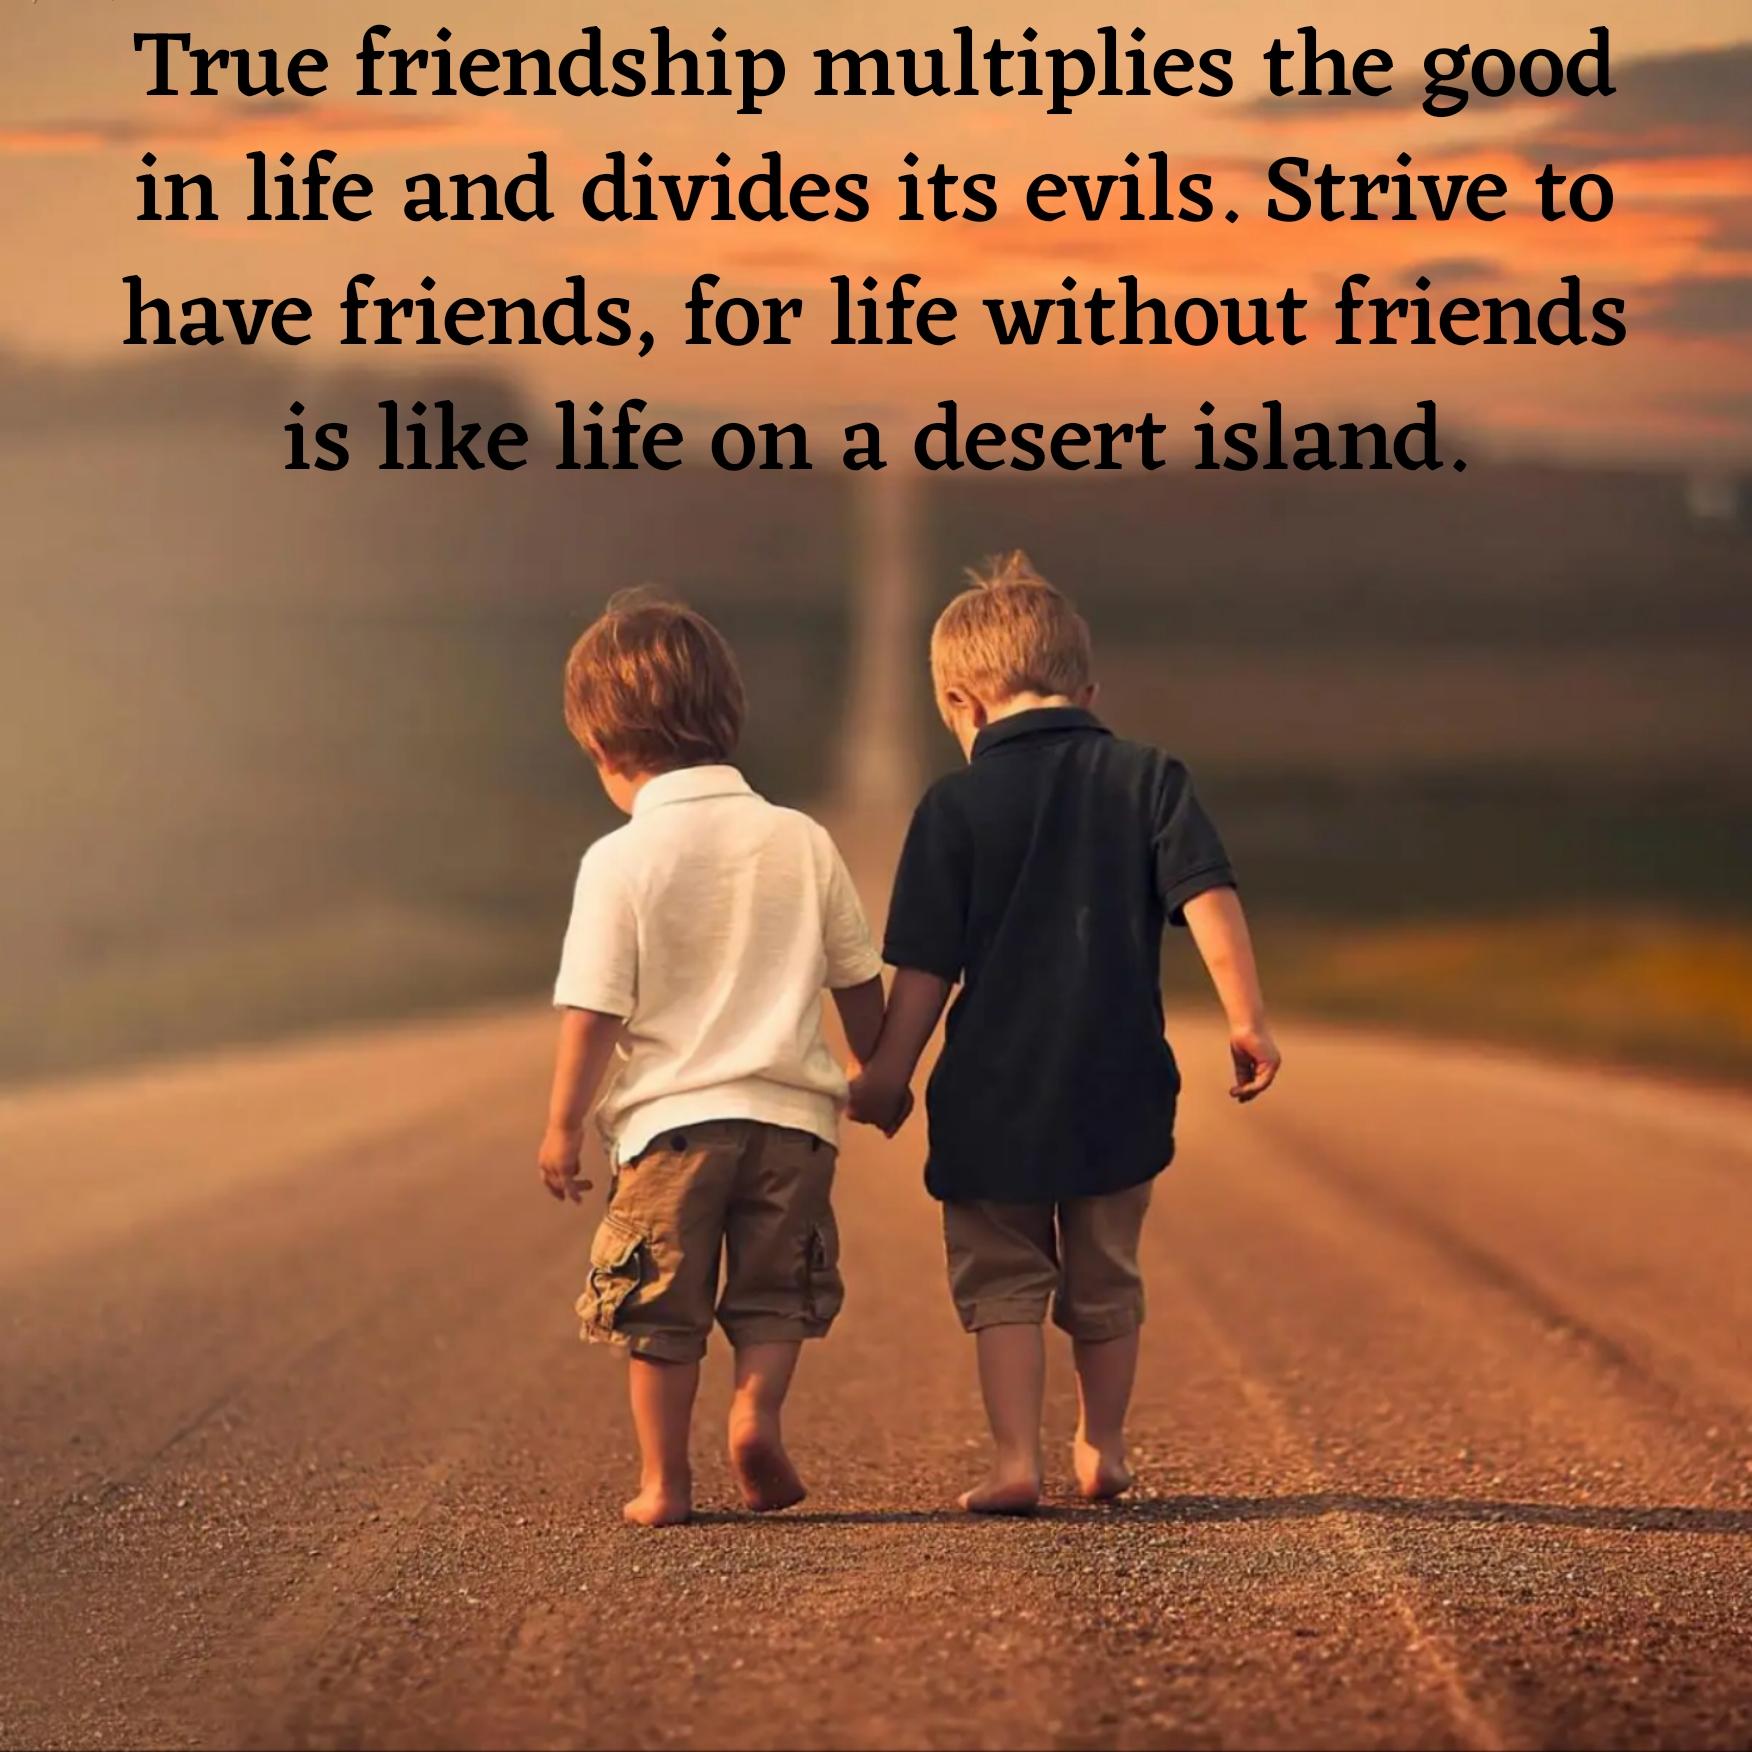 True friendship multiplies the good in life and divides its evils